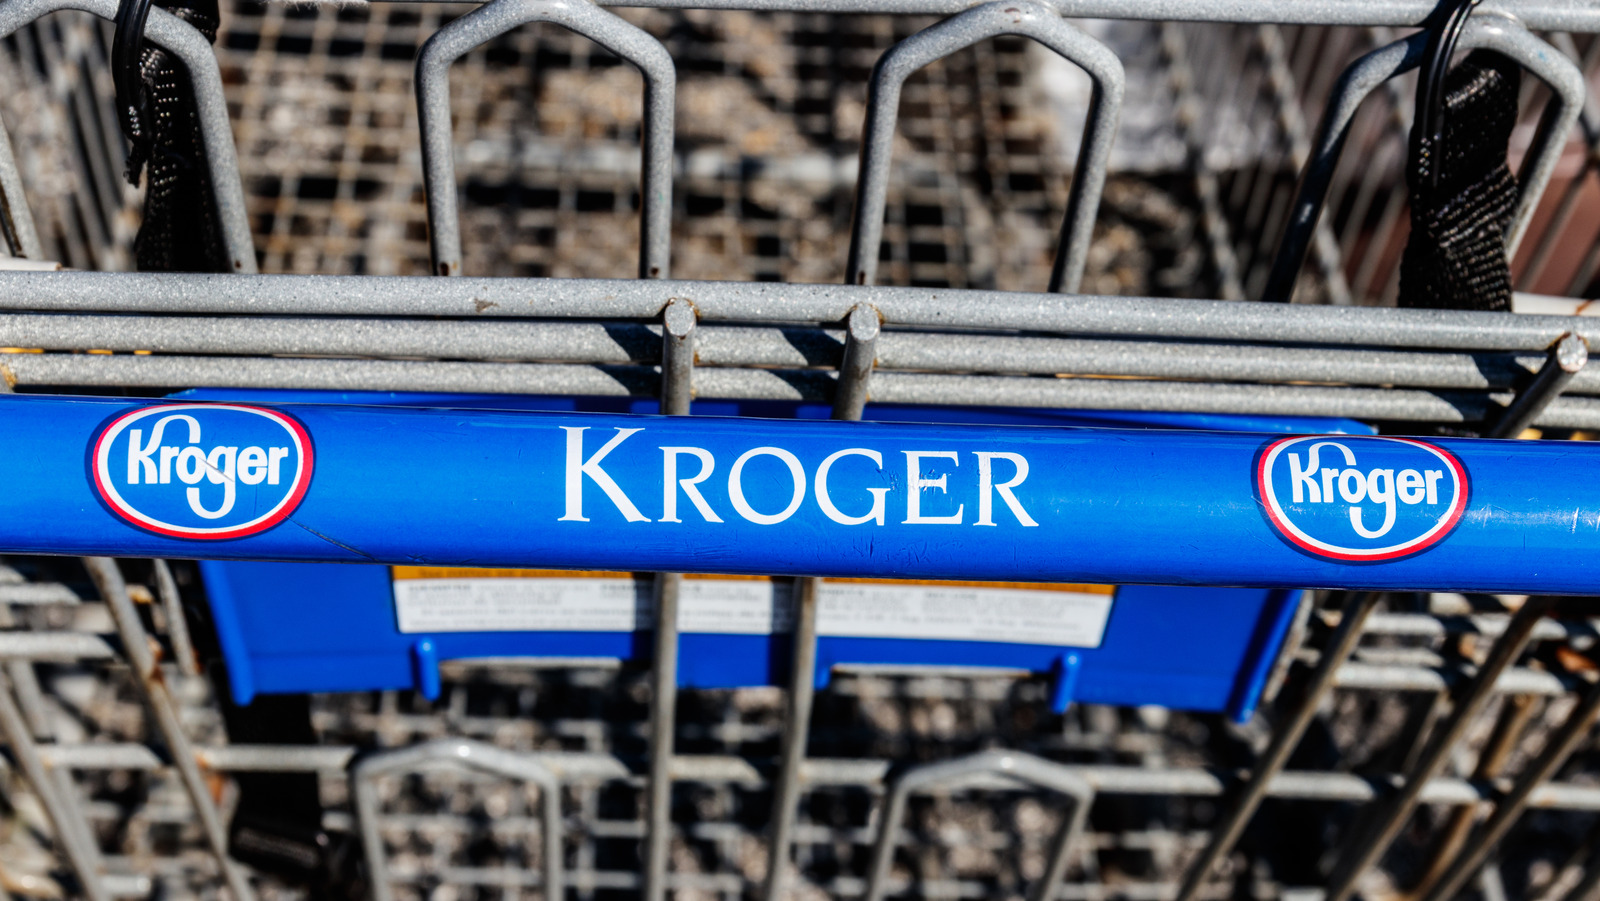 Buy 5 and Save $1 Each Sale Event - Kroger